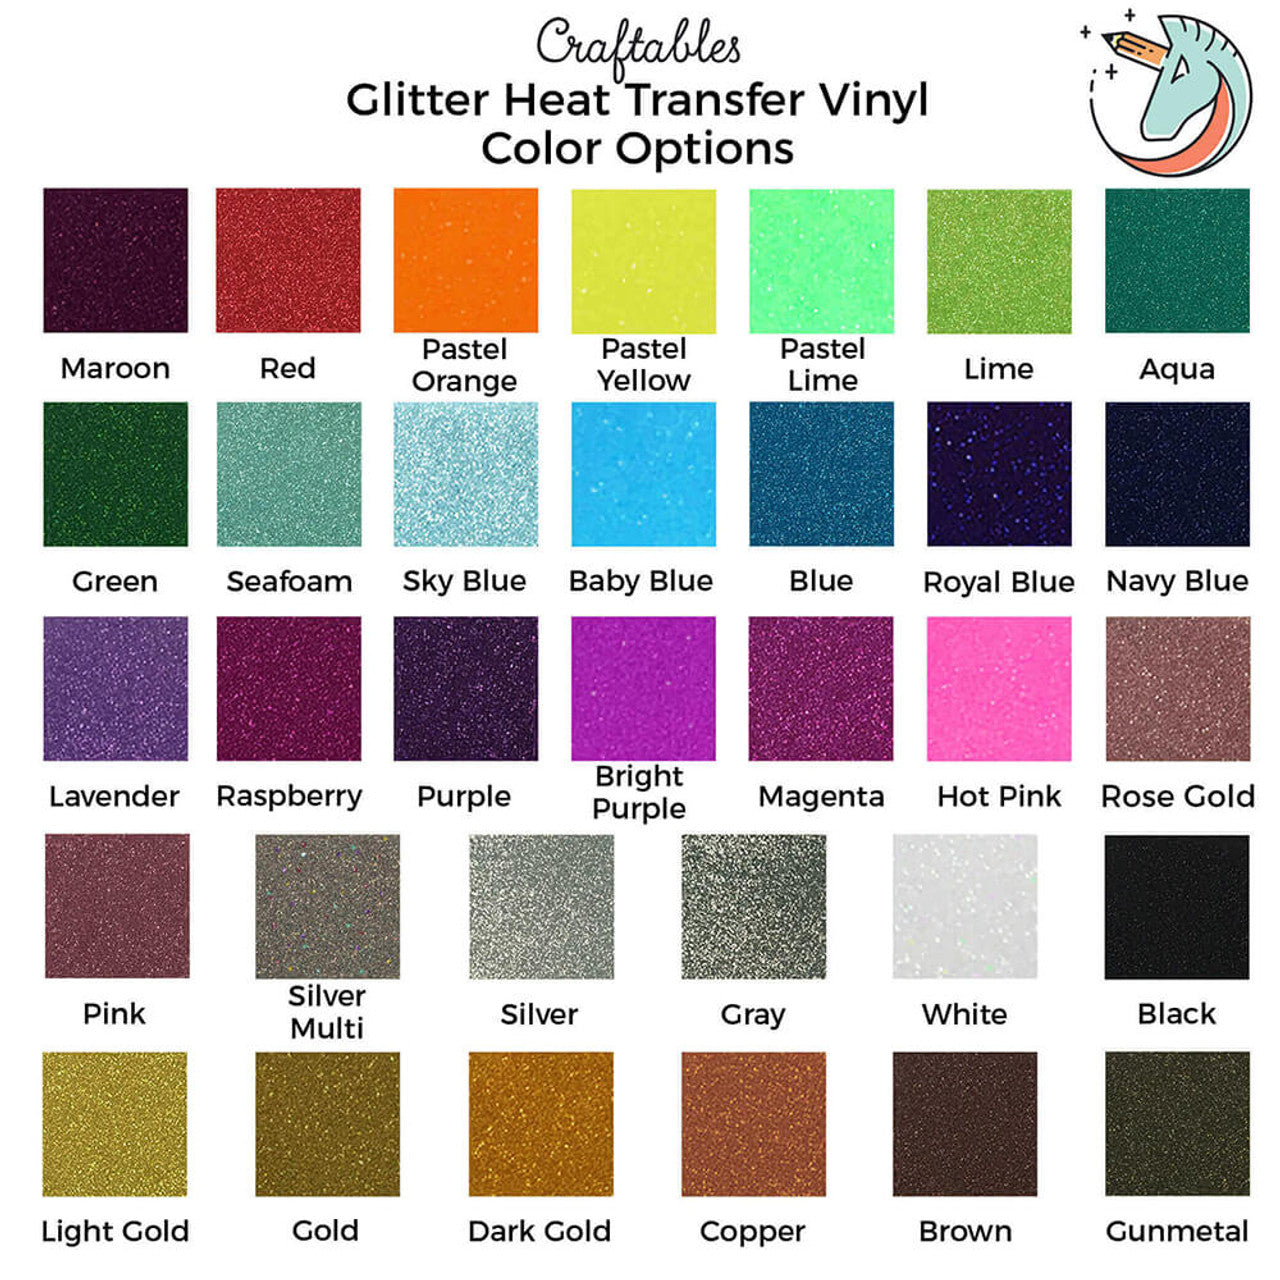 Pastel Lime Glitter Heat Transfer Vinyl Sheets By Craftables